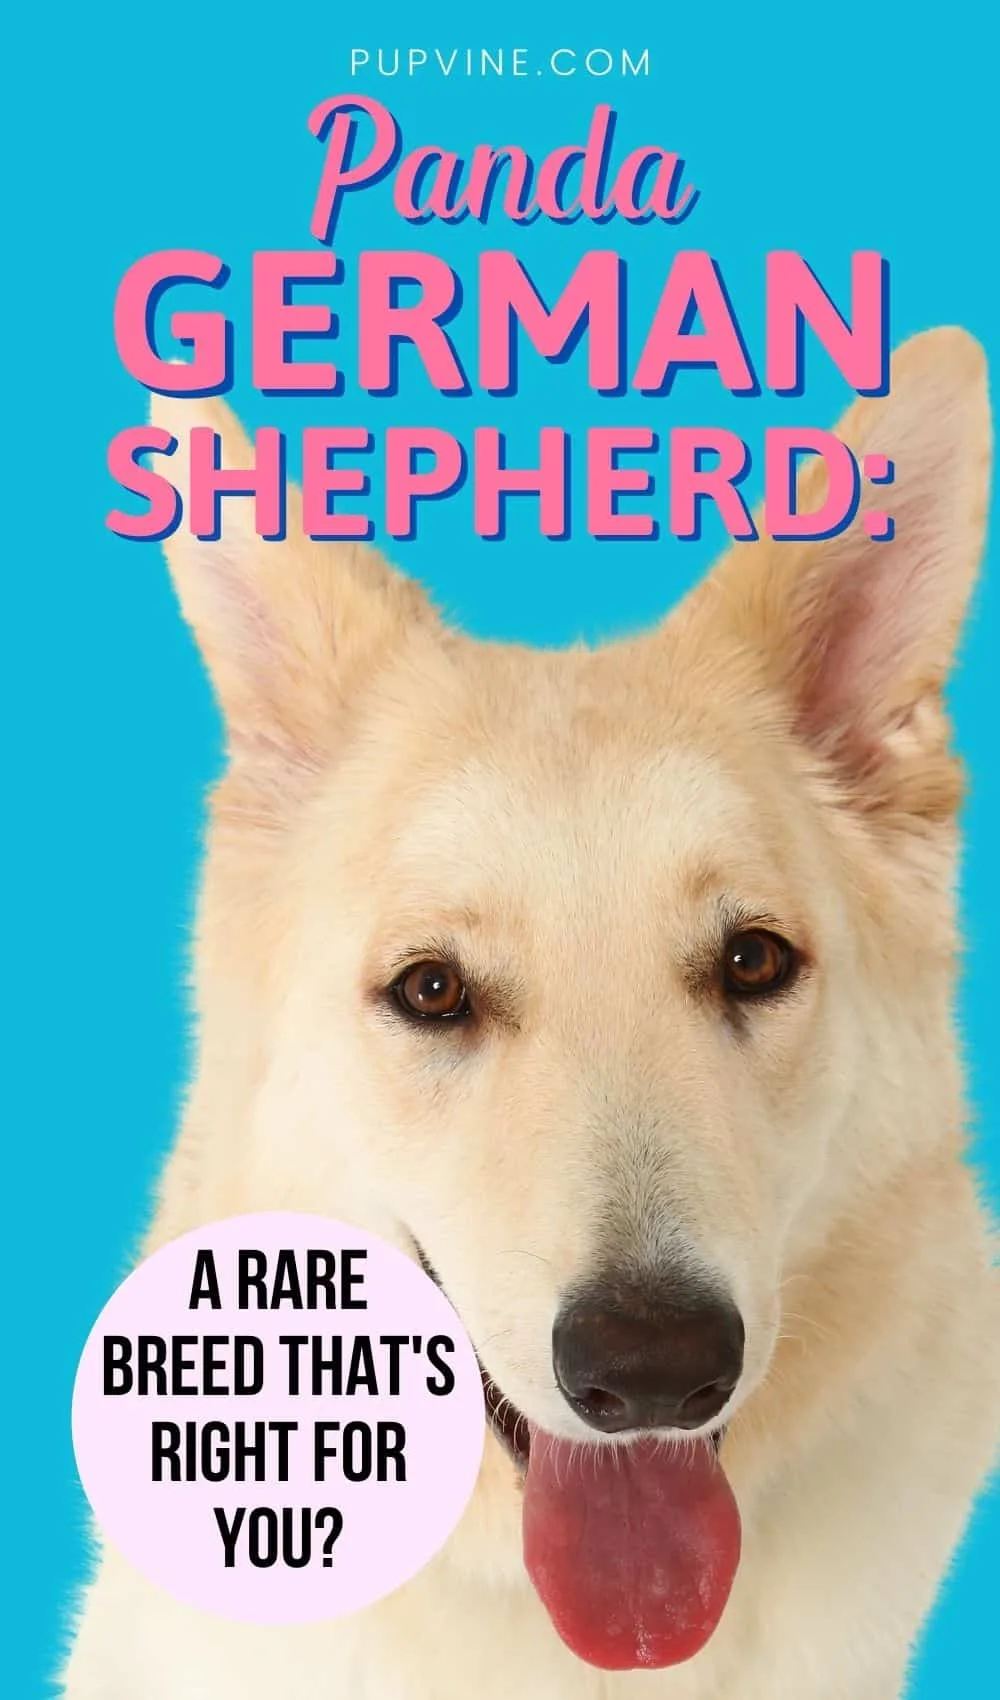 Panda German Shepherd: A Rare Breed That's Right For You?